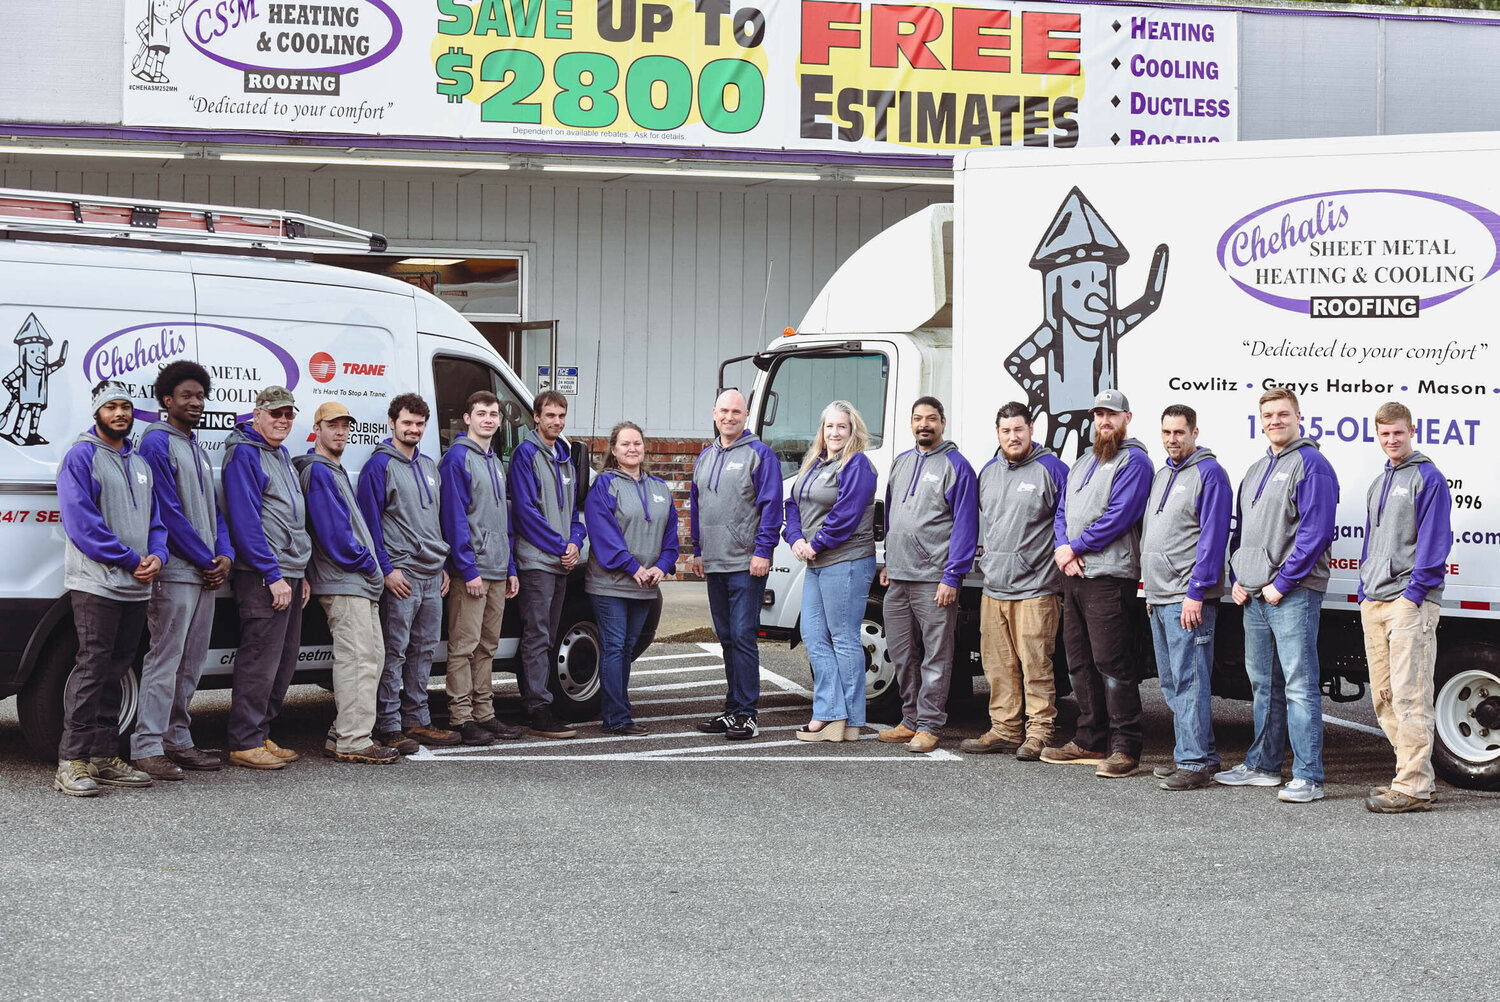 Employees of Chehalis Sheet Metal pose in front of the company's Tumwater location.